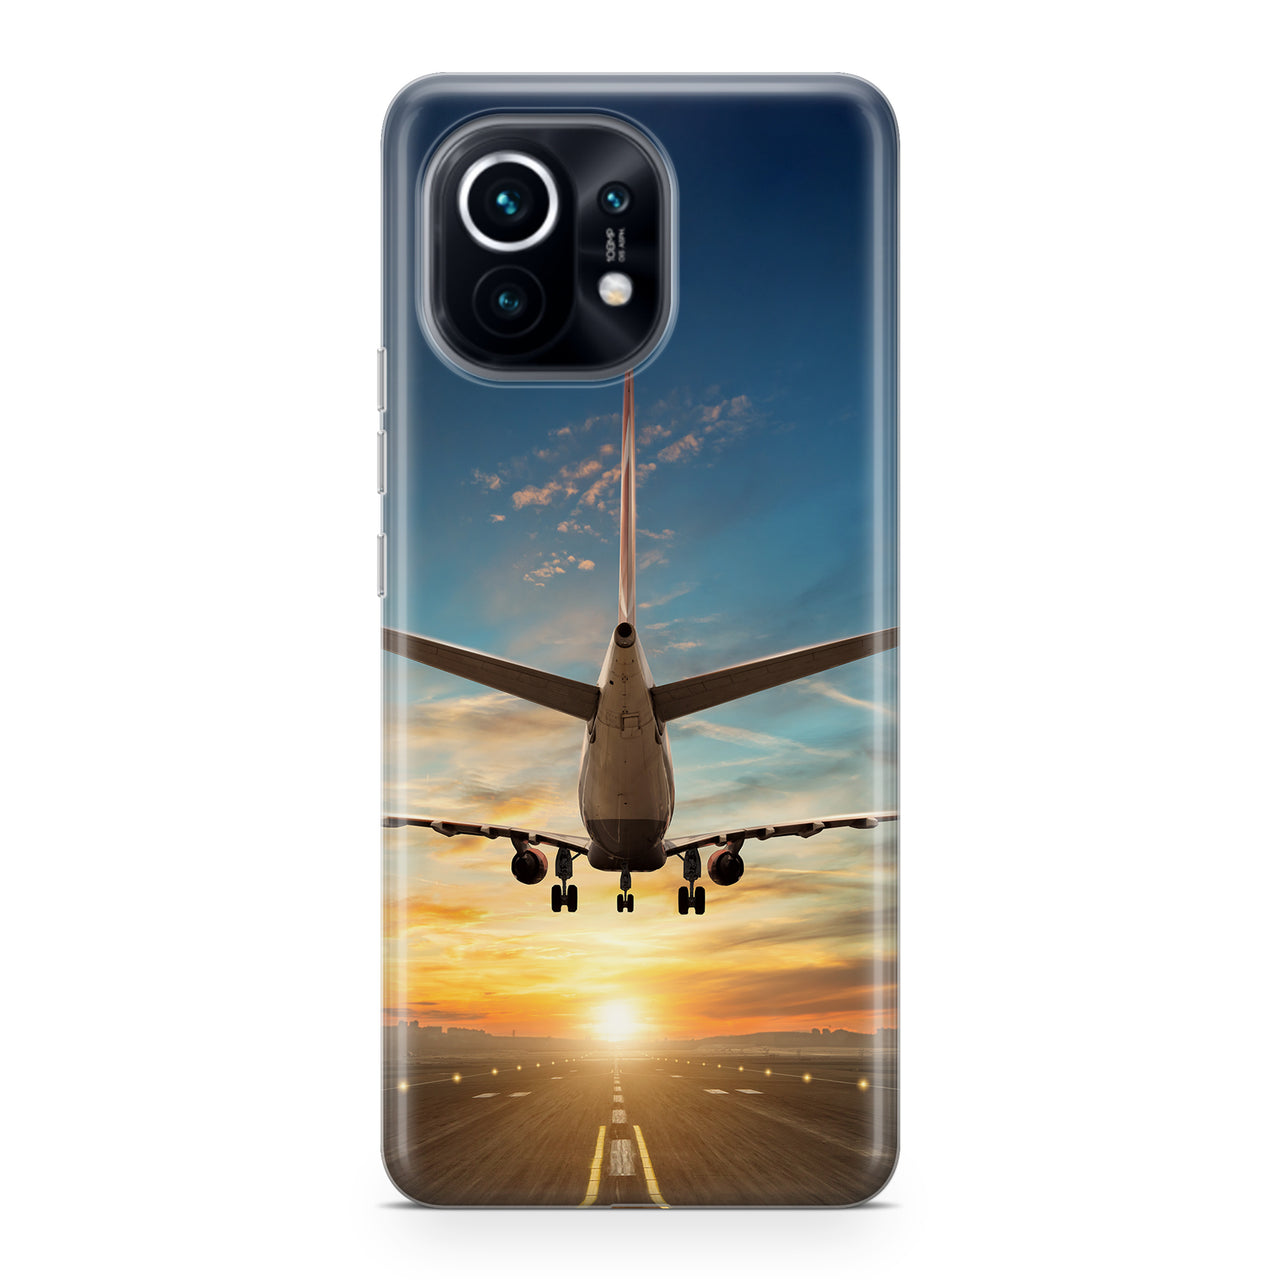 Airplane over Runway Towards the Sunrise Designed Xiaomi Cases